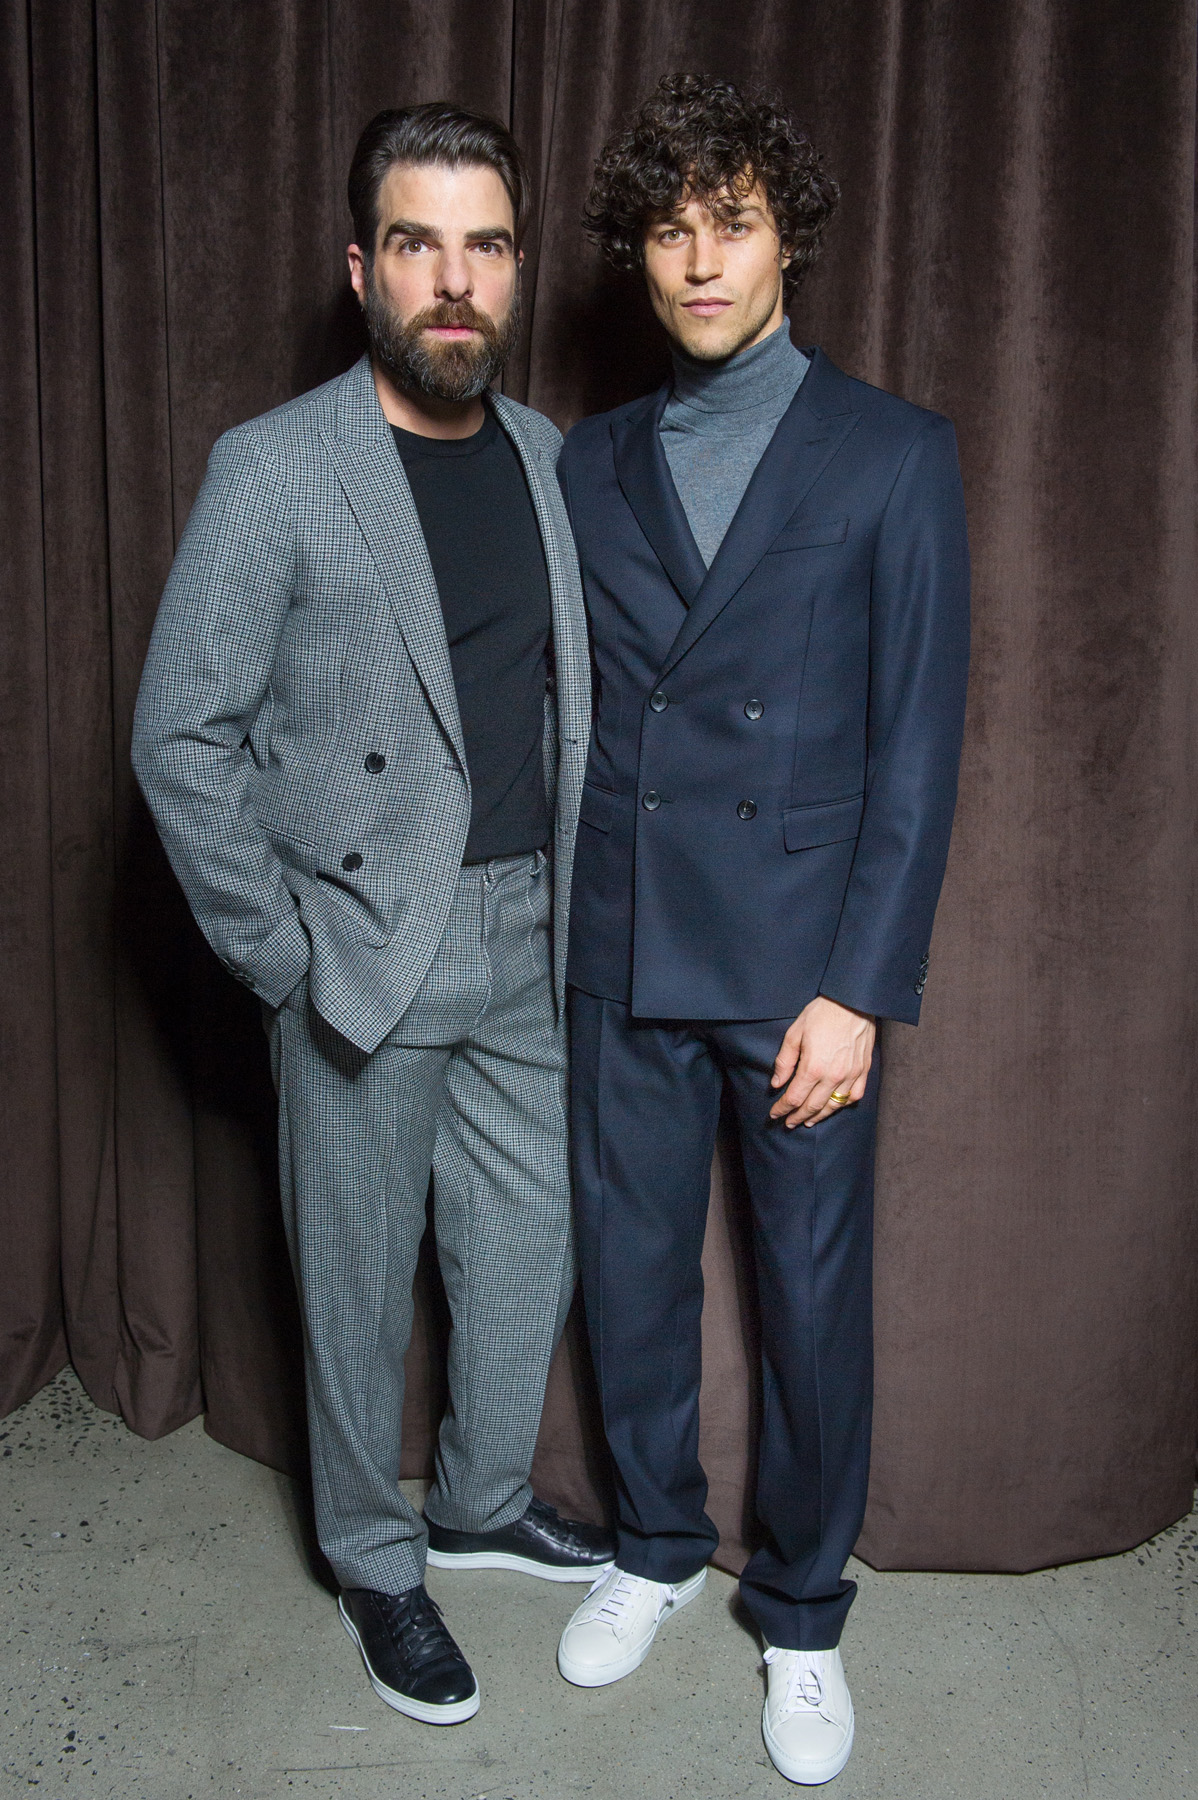 Zachary Quinto in HUGO BOSS & Miles McMillan in HUGO BOSS at the BOSS Menswear Fall/Winter 2017 collection presentation